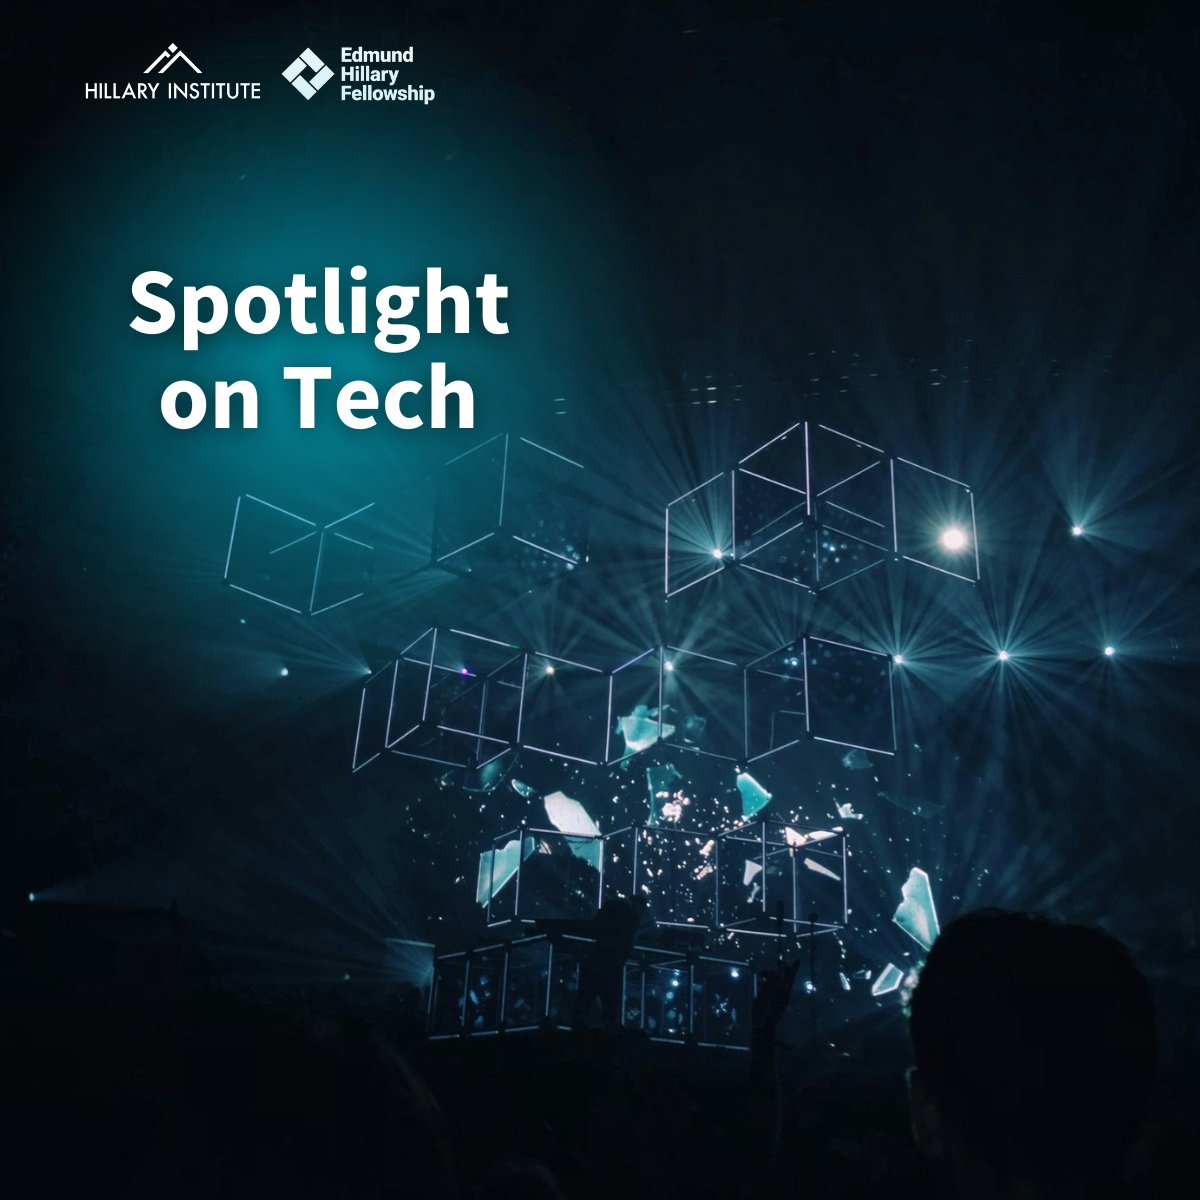 In May we will shine a ‘Spotlight on Tech’ to celebrate @TechweekNZ 2024, NZ’s tech sector & the amazing EHF Fellows working in tech including AI, web3, metaverse, blockchain, cryptocurrency, gaming, VR, digital storytelling, tech ethics, governance & investment, plus much more.